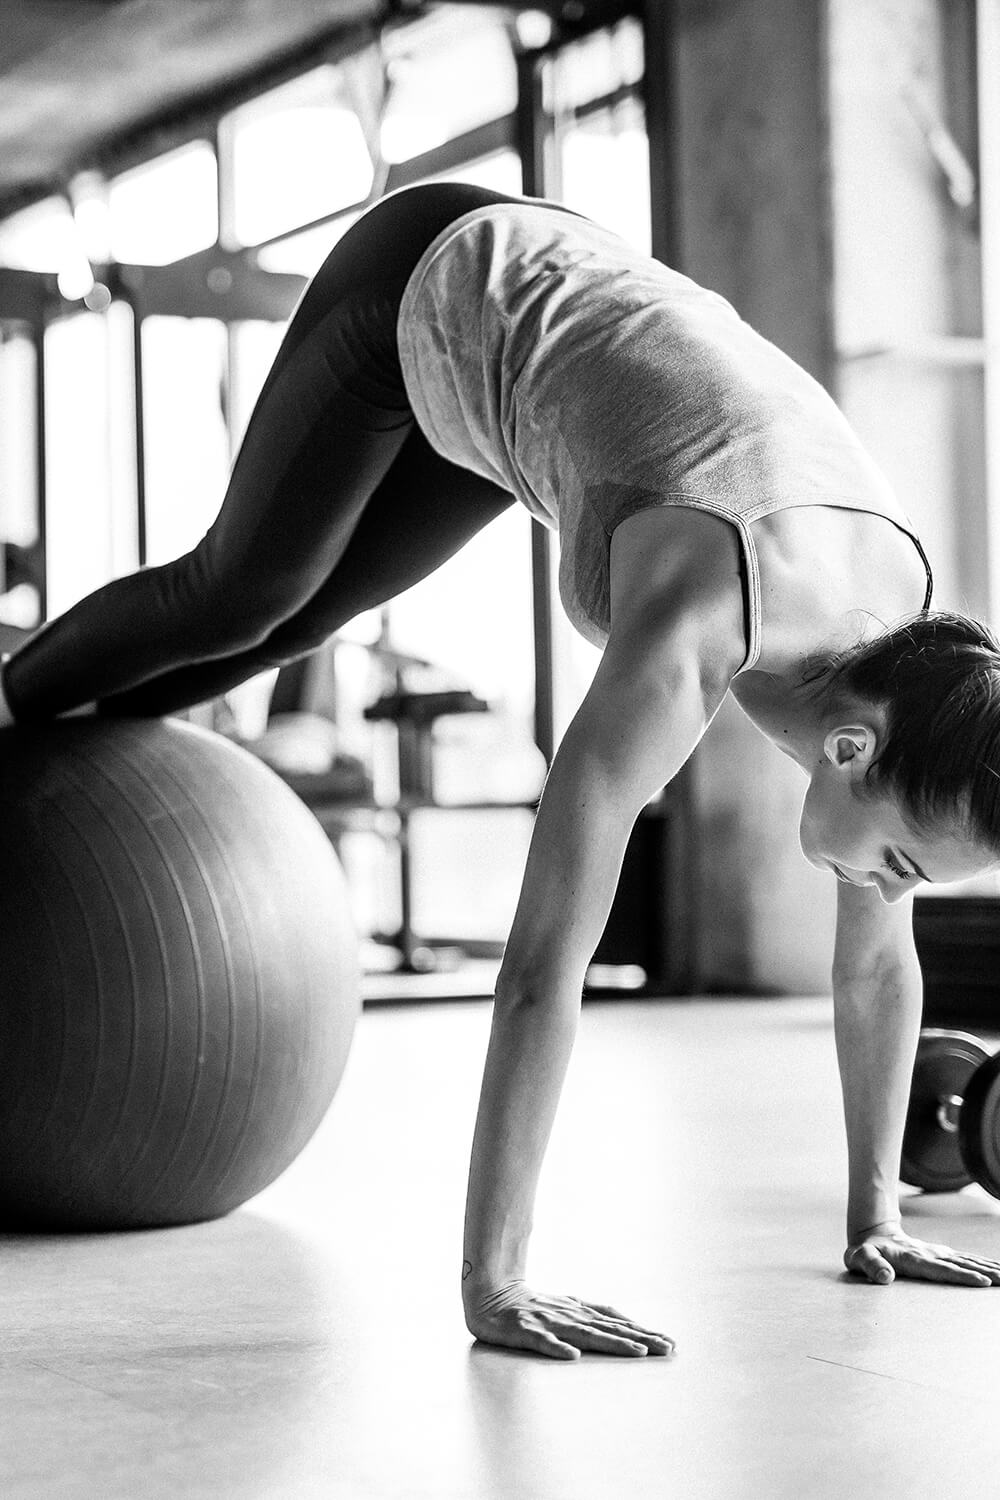 Stability and core strength using a gym ball